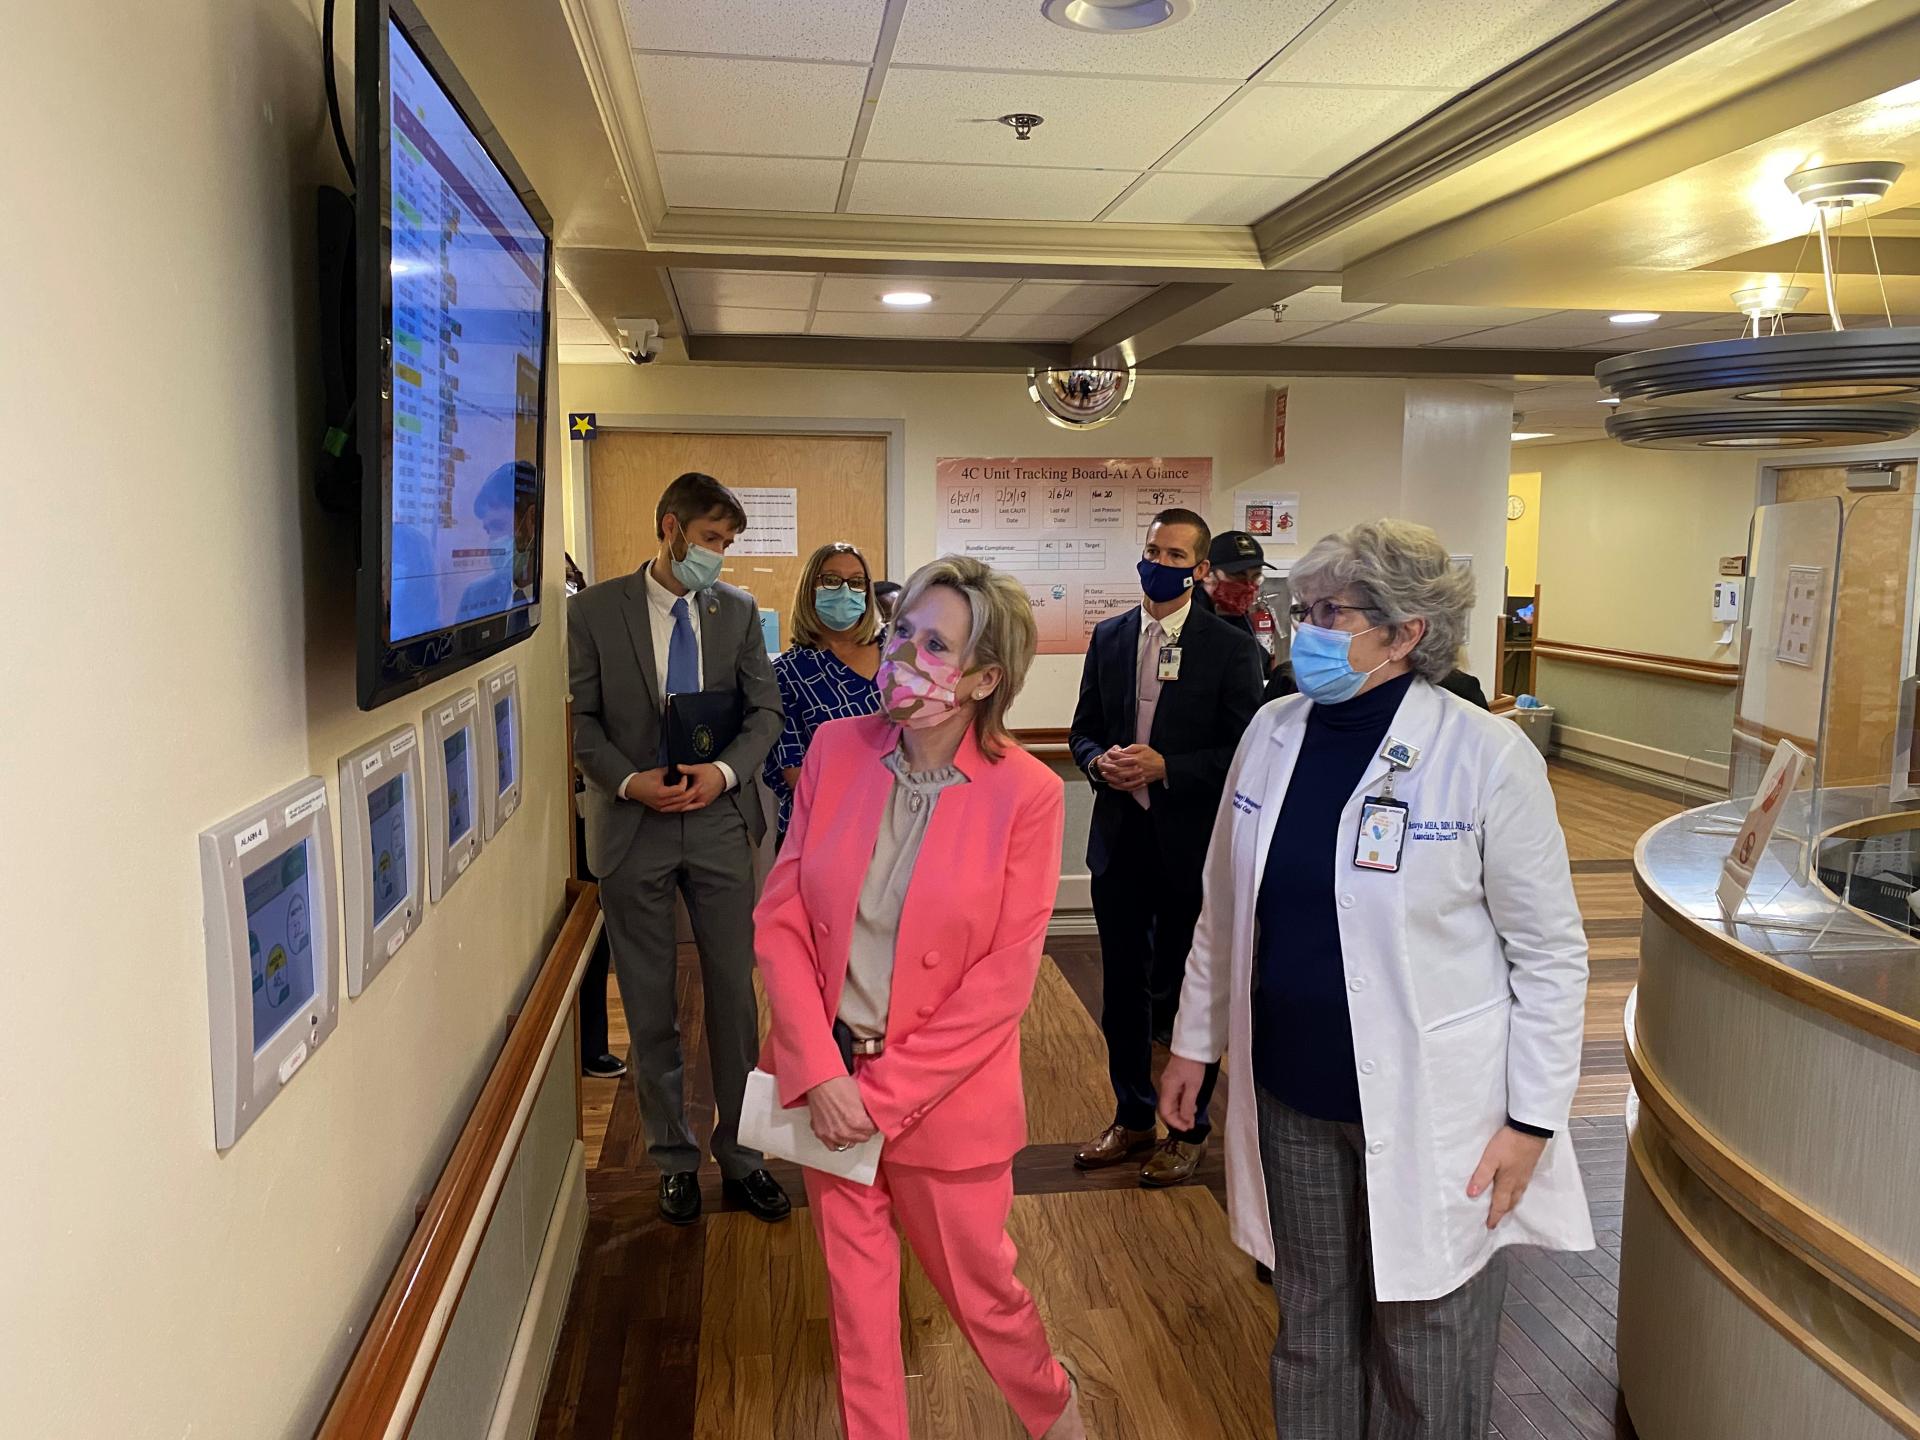 Senator Hyde-Smith receives a briefing on operations at the G.V. (Sonny) Montgomery VA Medical Center in Jackson, including its COVID vaccination clinic. (March 12, 2021)